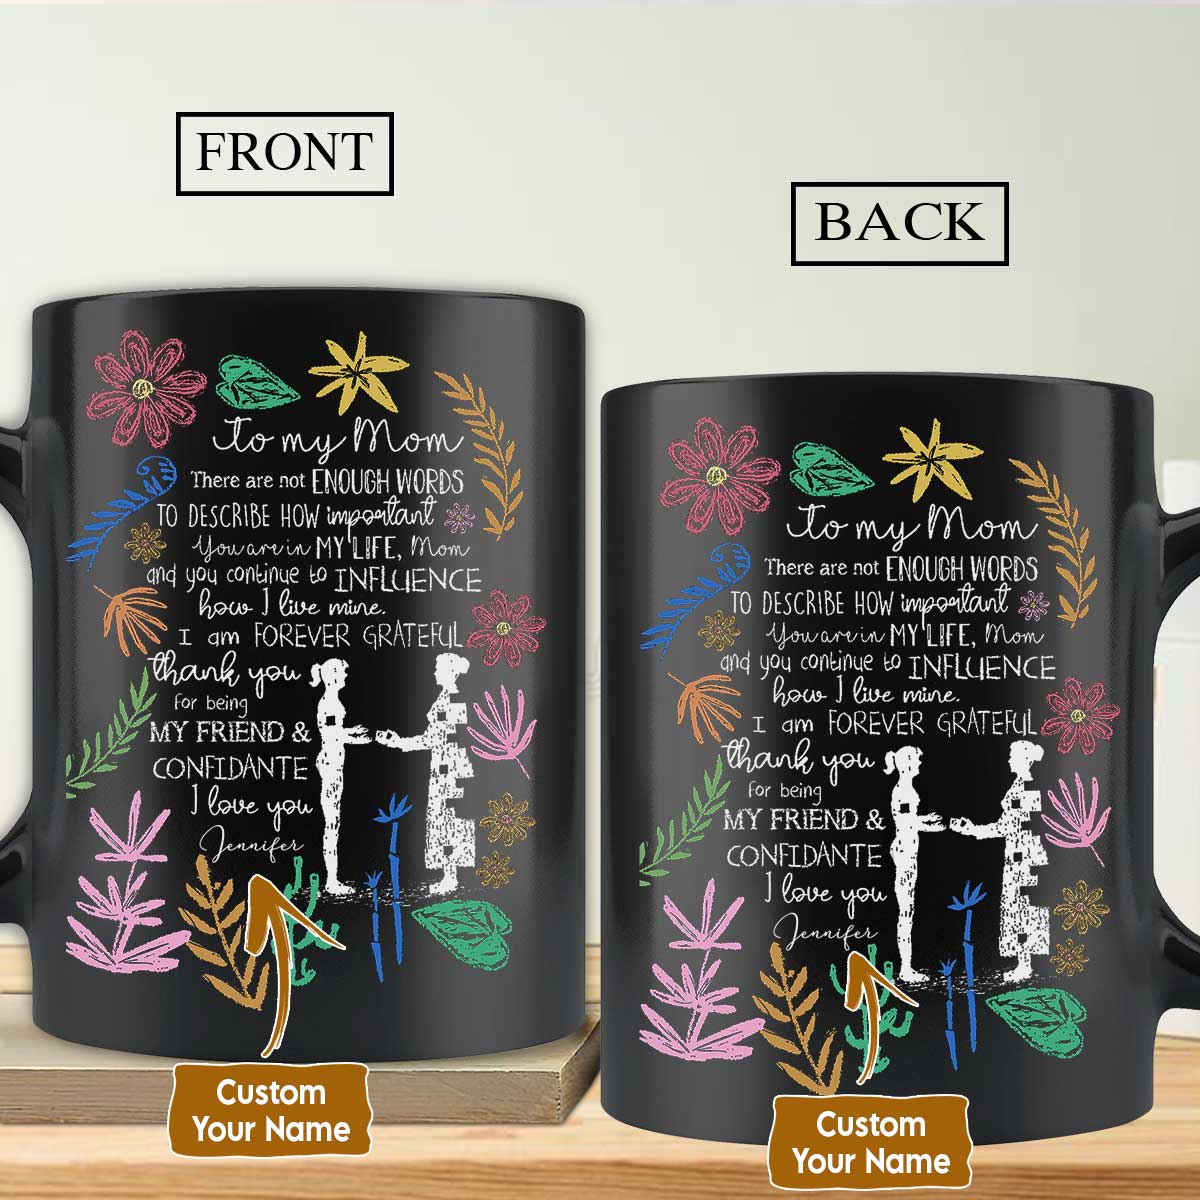 Gift For Mom Personalized Mug - Daughter to mom, Flower frame Mug, Being my friend and confidante Mug - Custom Gift For Mother's Day, Presents for Mom